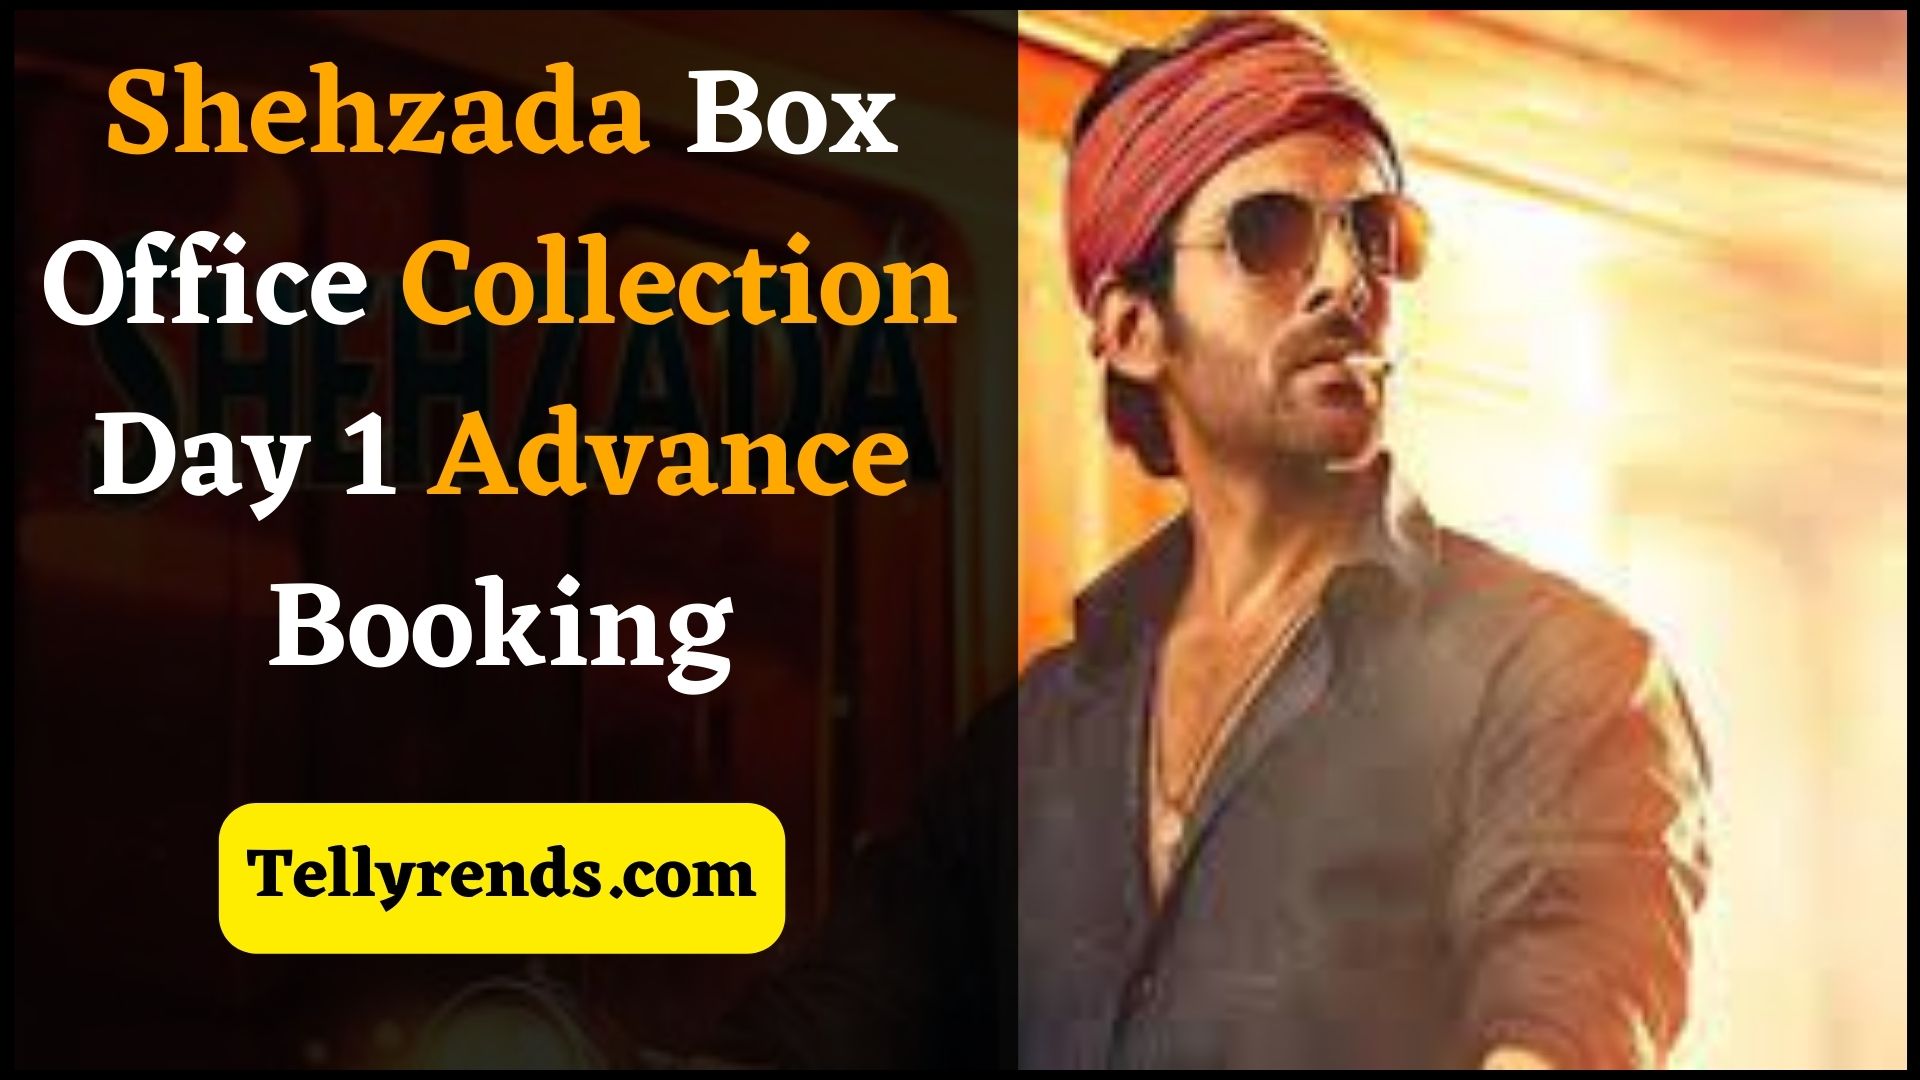 Shehzada Box Office Collection Day 1 Advance Booking